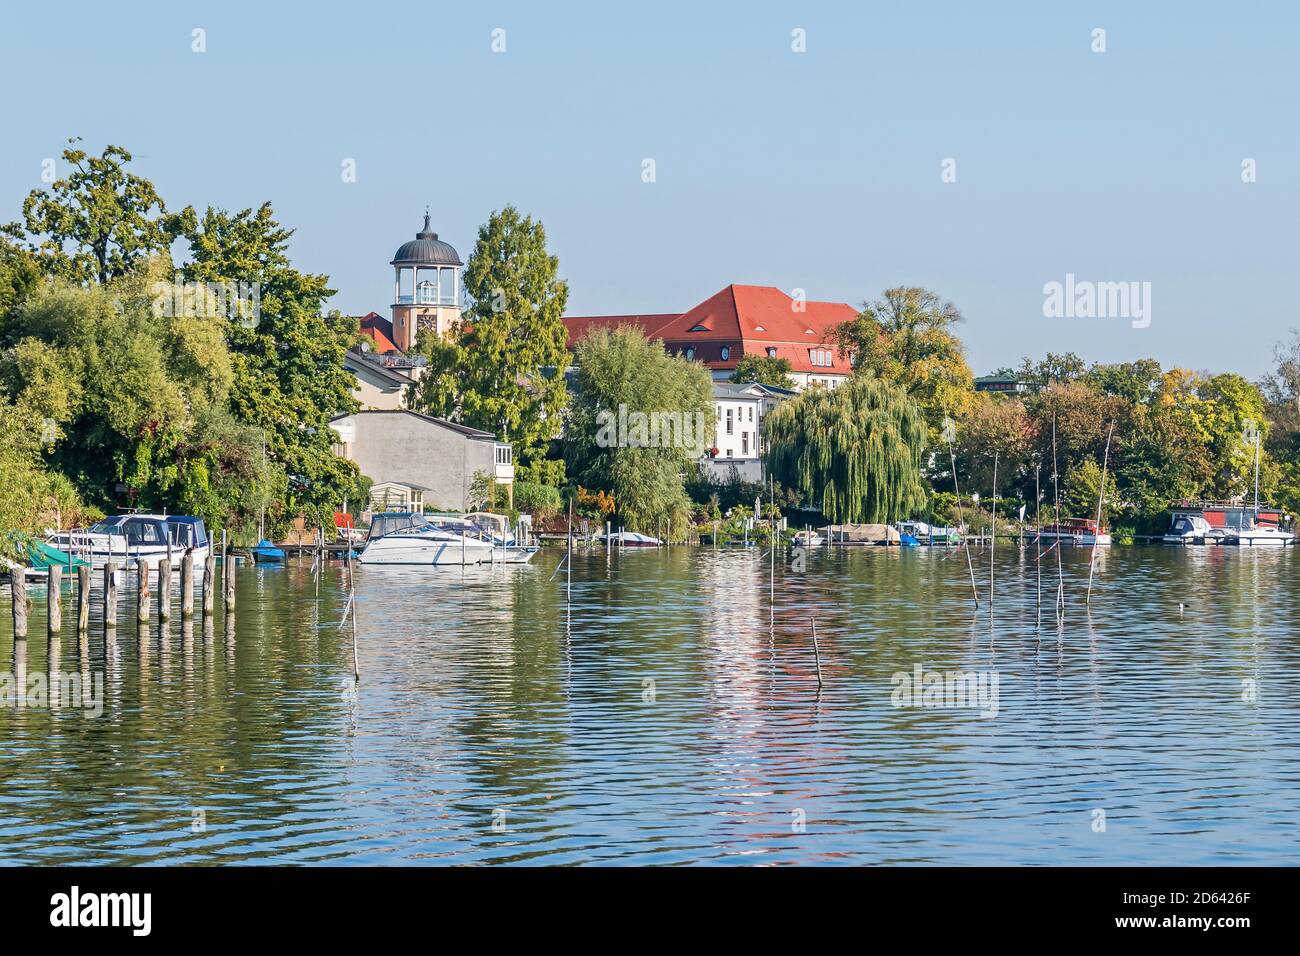 Potsdam, Germany -  September 30, 2020: Shore of the Tiefer See (Tiefer Lake) with the clock tower of the Oberstufenzentrum (Upper School Center) Joha Stock Photo